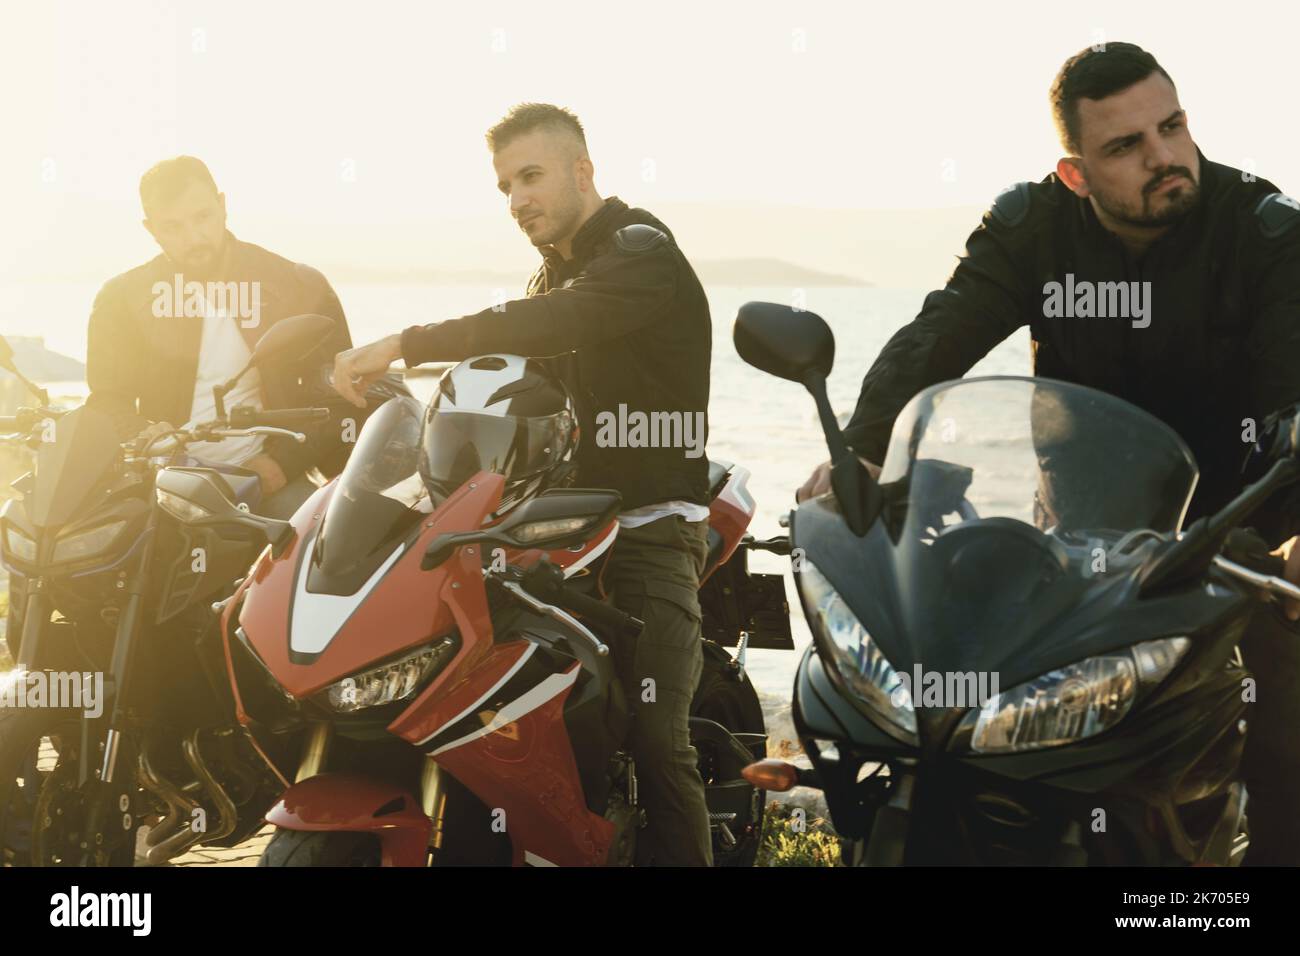 Three motorcyclye riders posing near the sea with their vehicles. Stock Photo